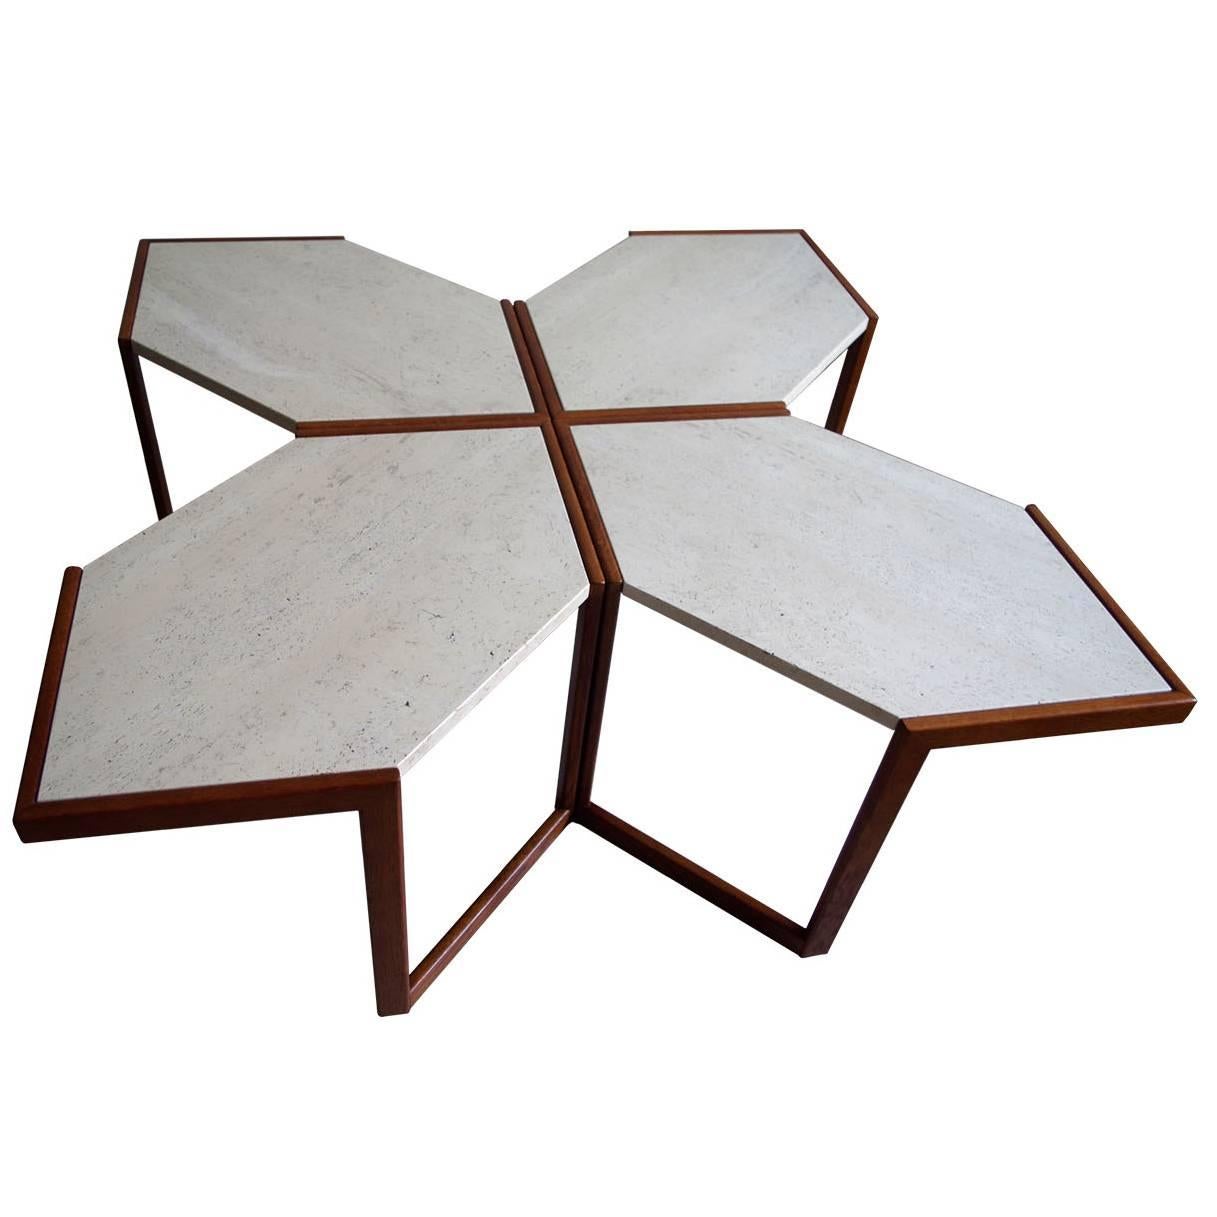 Set of Four Italian Modular Wood and Stone Coffee Side Sofa Tables, 1960s For Sale